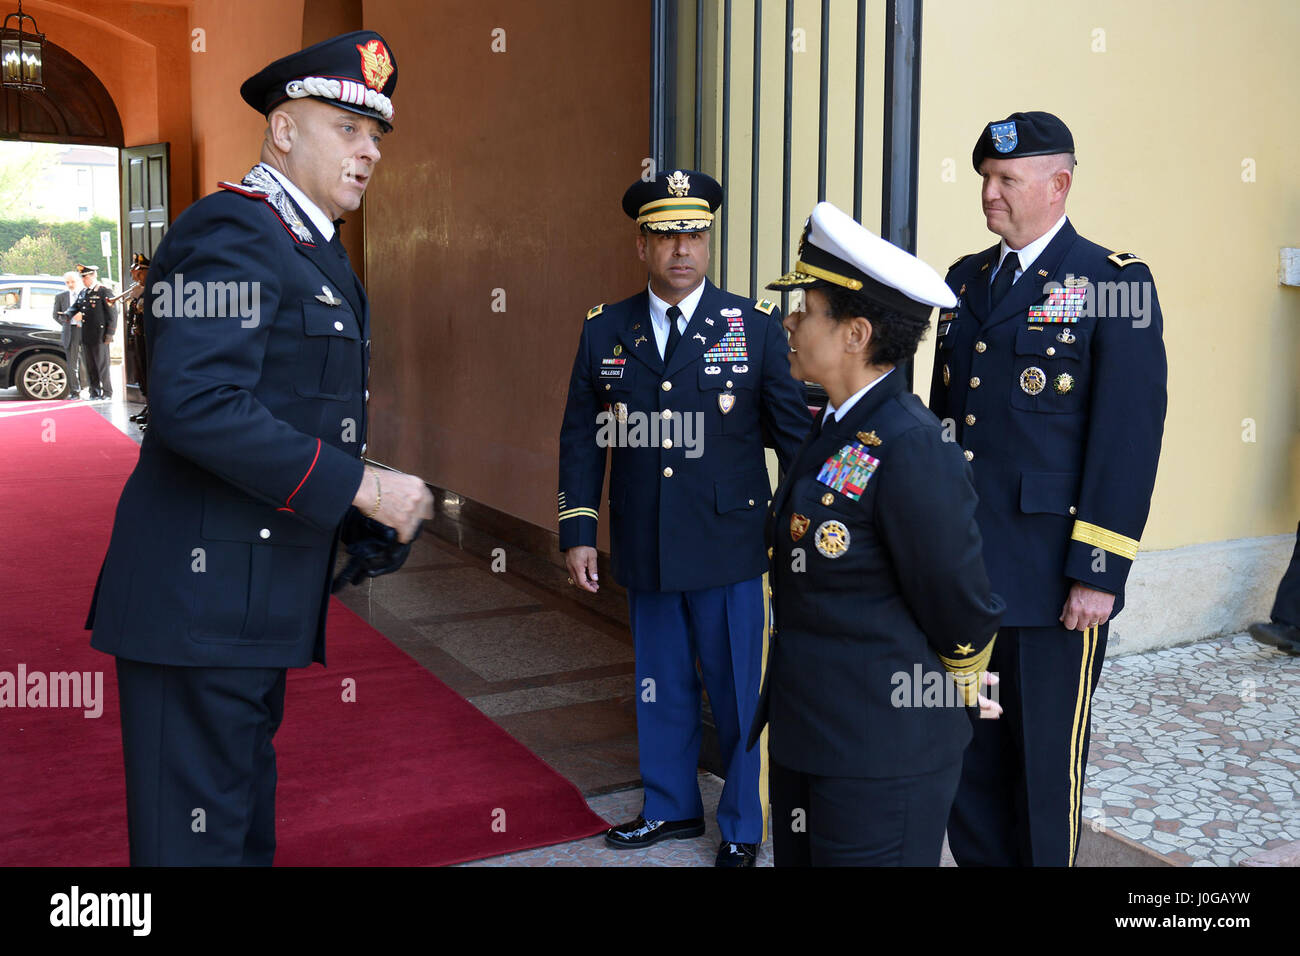 Italian Carabinieri Lt. Gen Vincenzo Coppola (left), Commanding General “Palidoro” Carabinieri Specialized and Mobile Units, meets Admiral Michelle Howard (left), NATO JFC-Naples Commander, during visit at the Center of Excellence for Stability Police Units (CoESPU) Vicenza, April 10, 2017. (U.S. Army Photo by Visual Information Specialist Paolo Bovo/released) Stock Photo